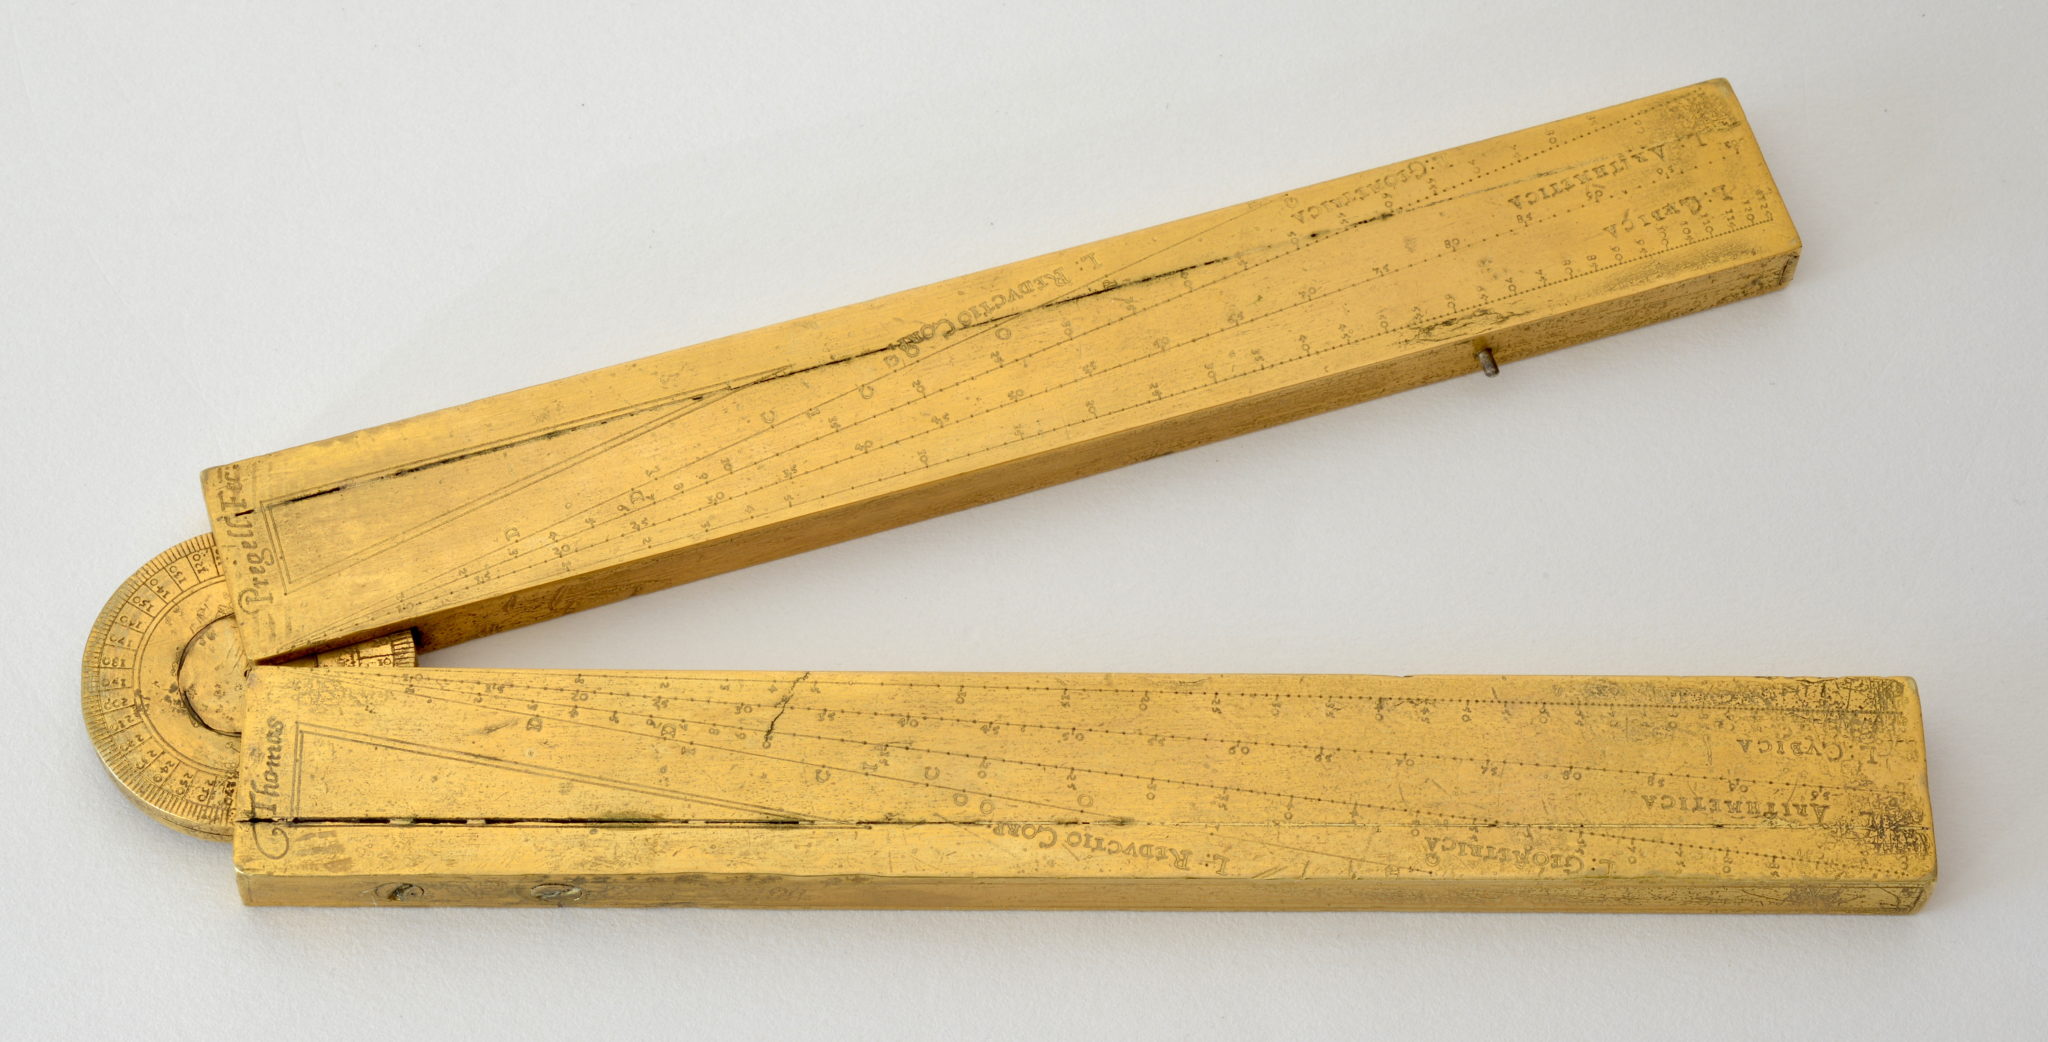 Dividers in gilted brass signed by Thomas Pregell and dated 1627